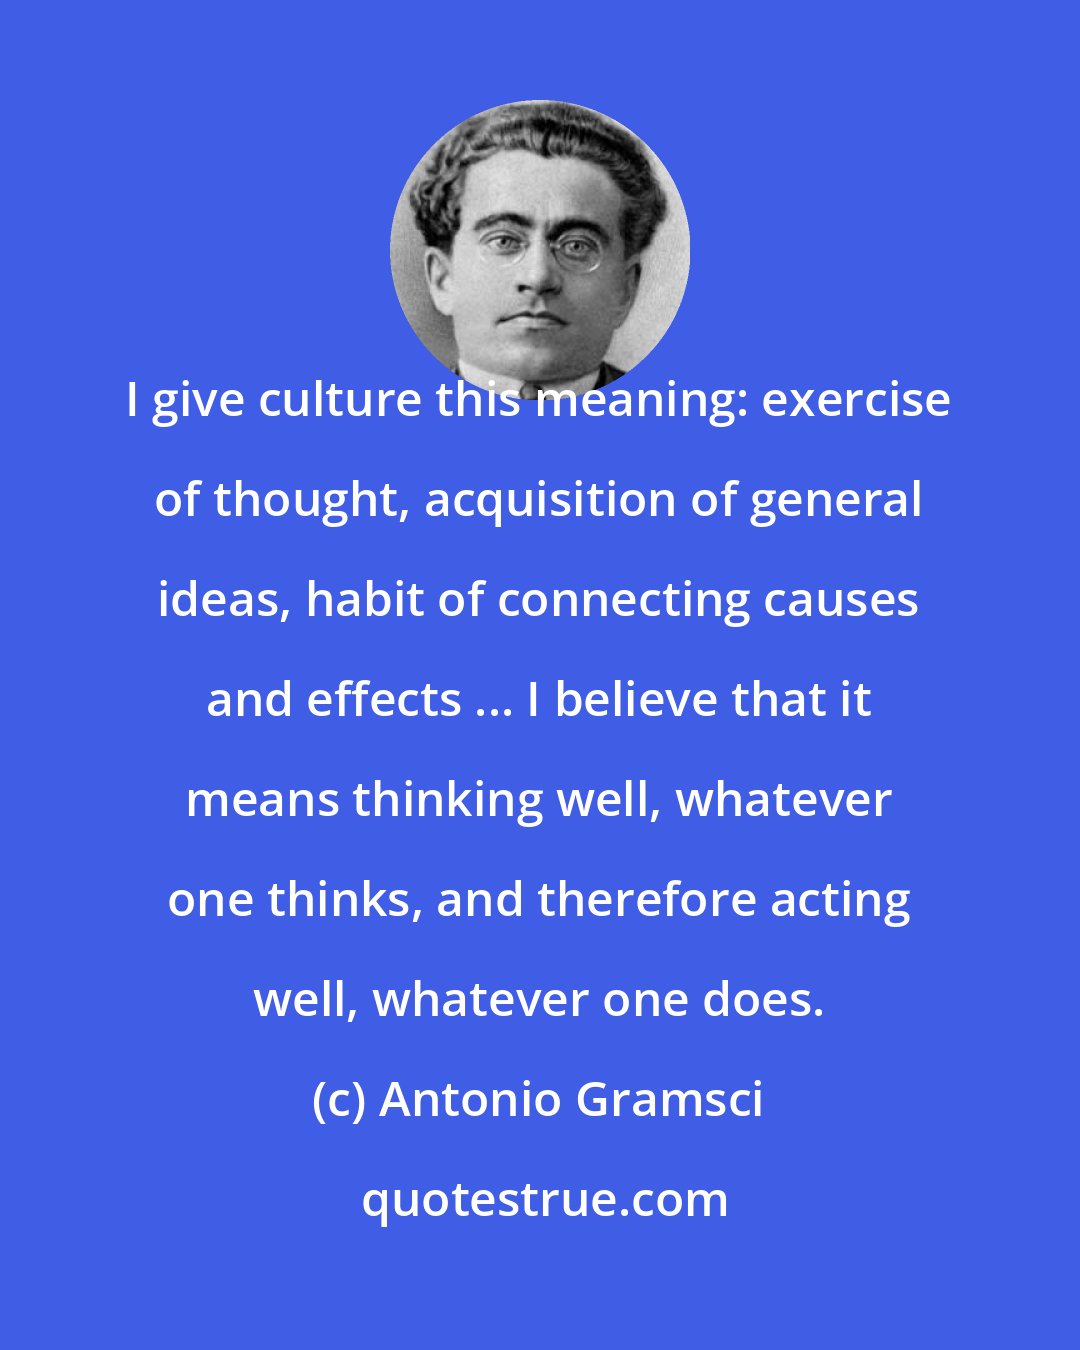 Antonio Gramsci: I give culture this meaning: exercise of thought, acquisition of general ideas, habit of connecting causes and effects ... I believe that it means thinking well, whatever one thinks, and therefore acting well, whatever one does.